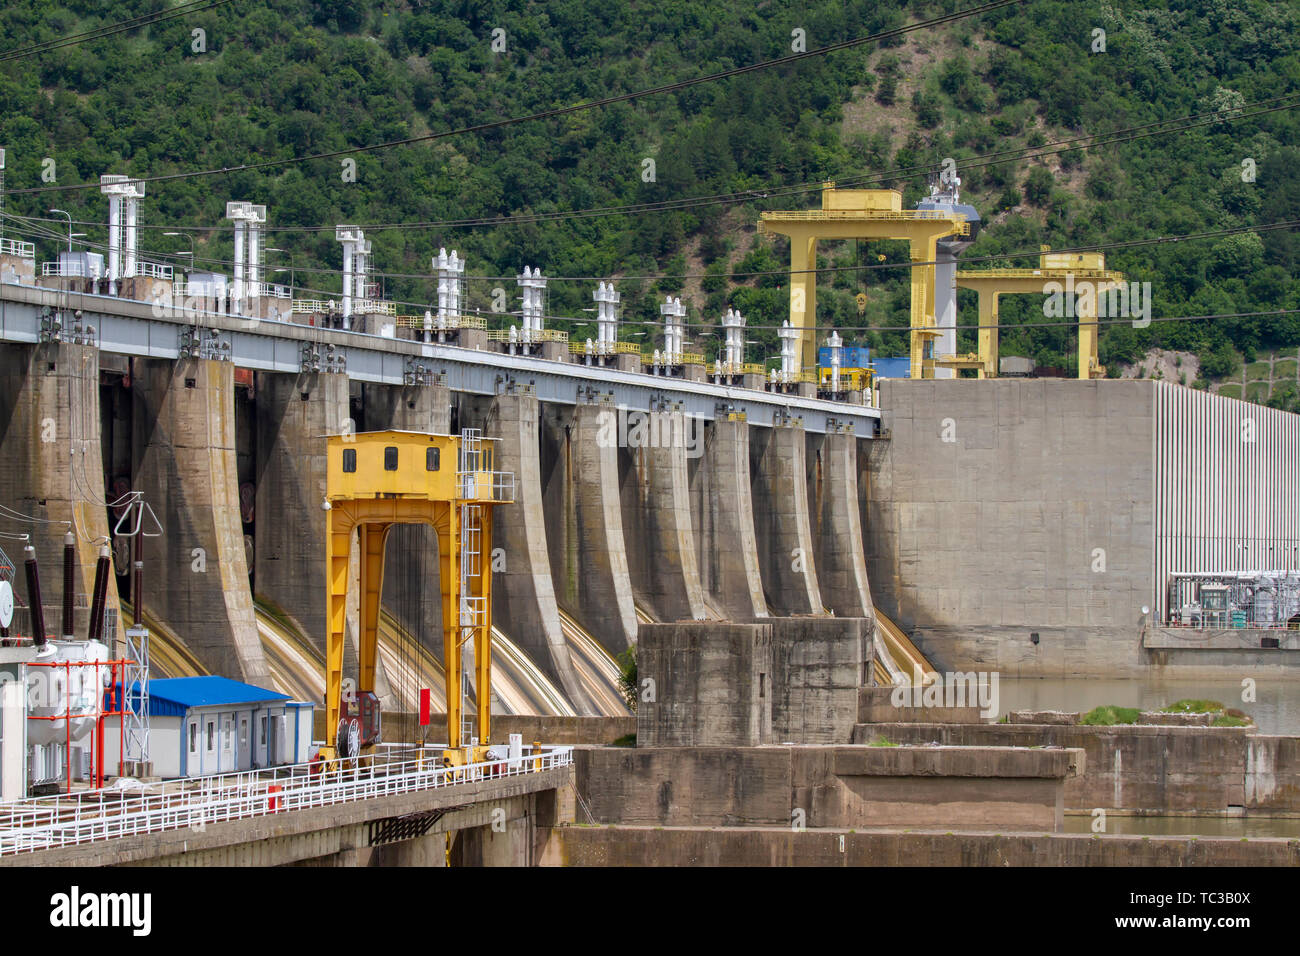 Iron Gat Hydroelectric Plant in the Iron Gate gorges on the Danube River between Serbia and Romania. Stock Photo